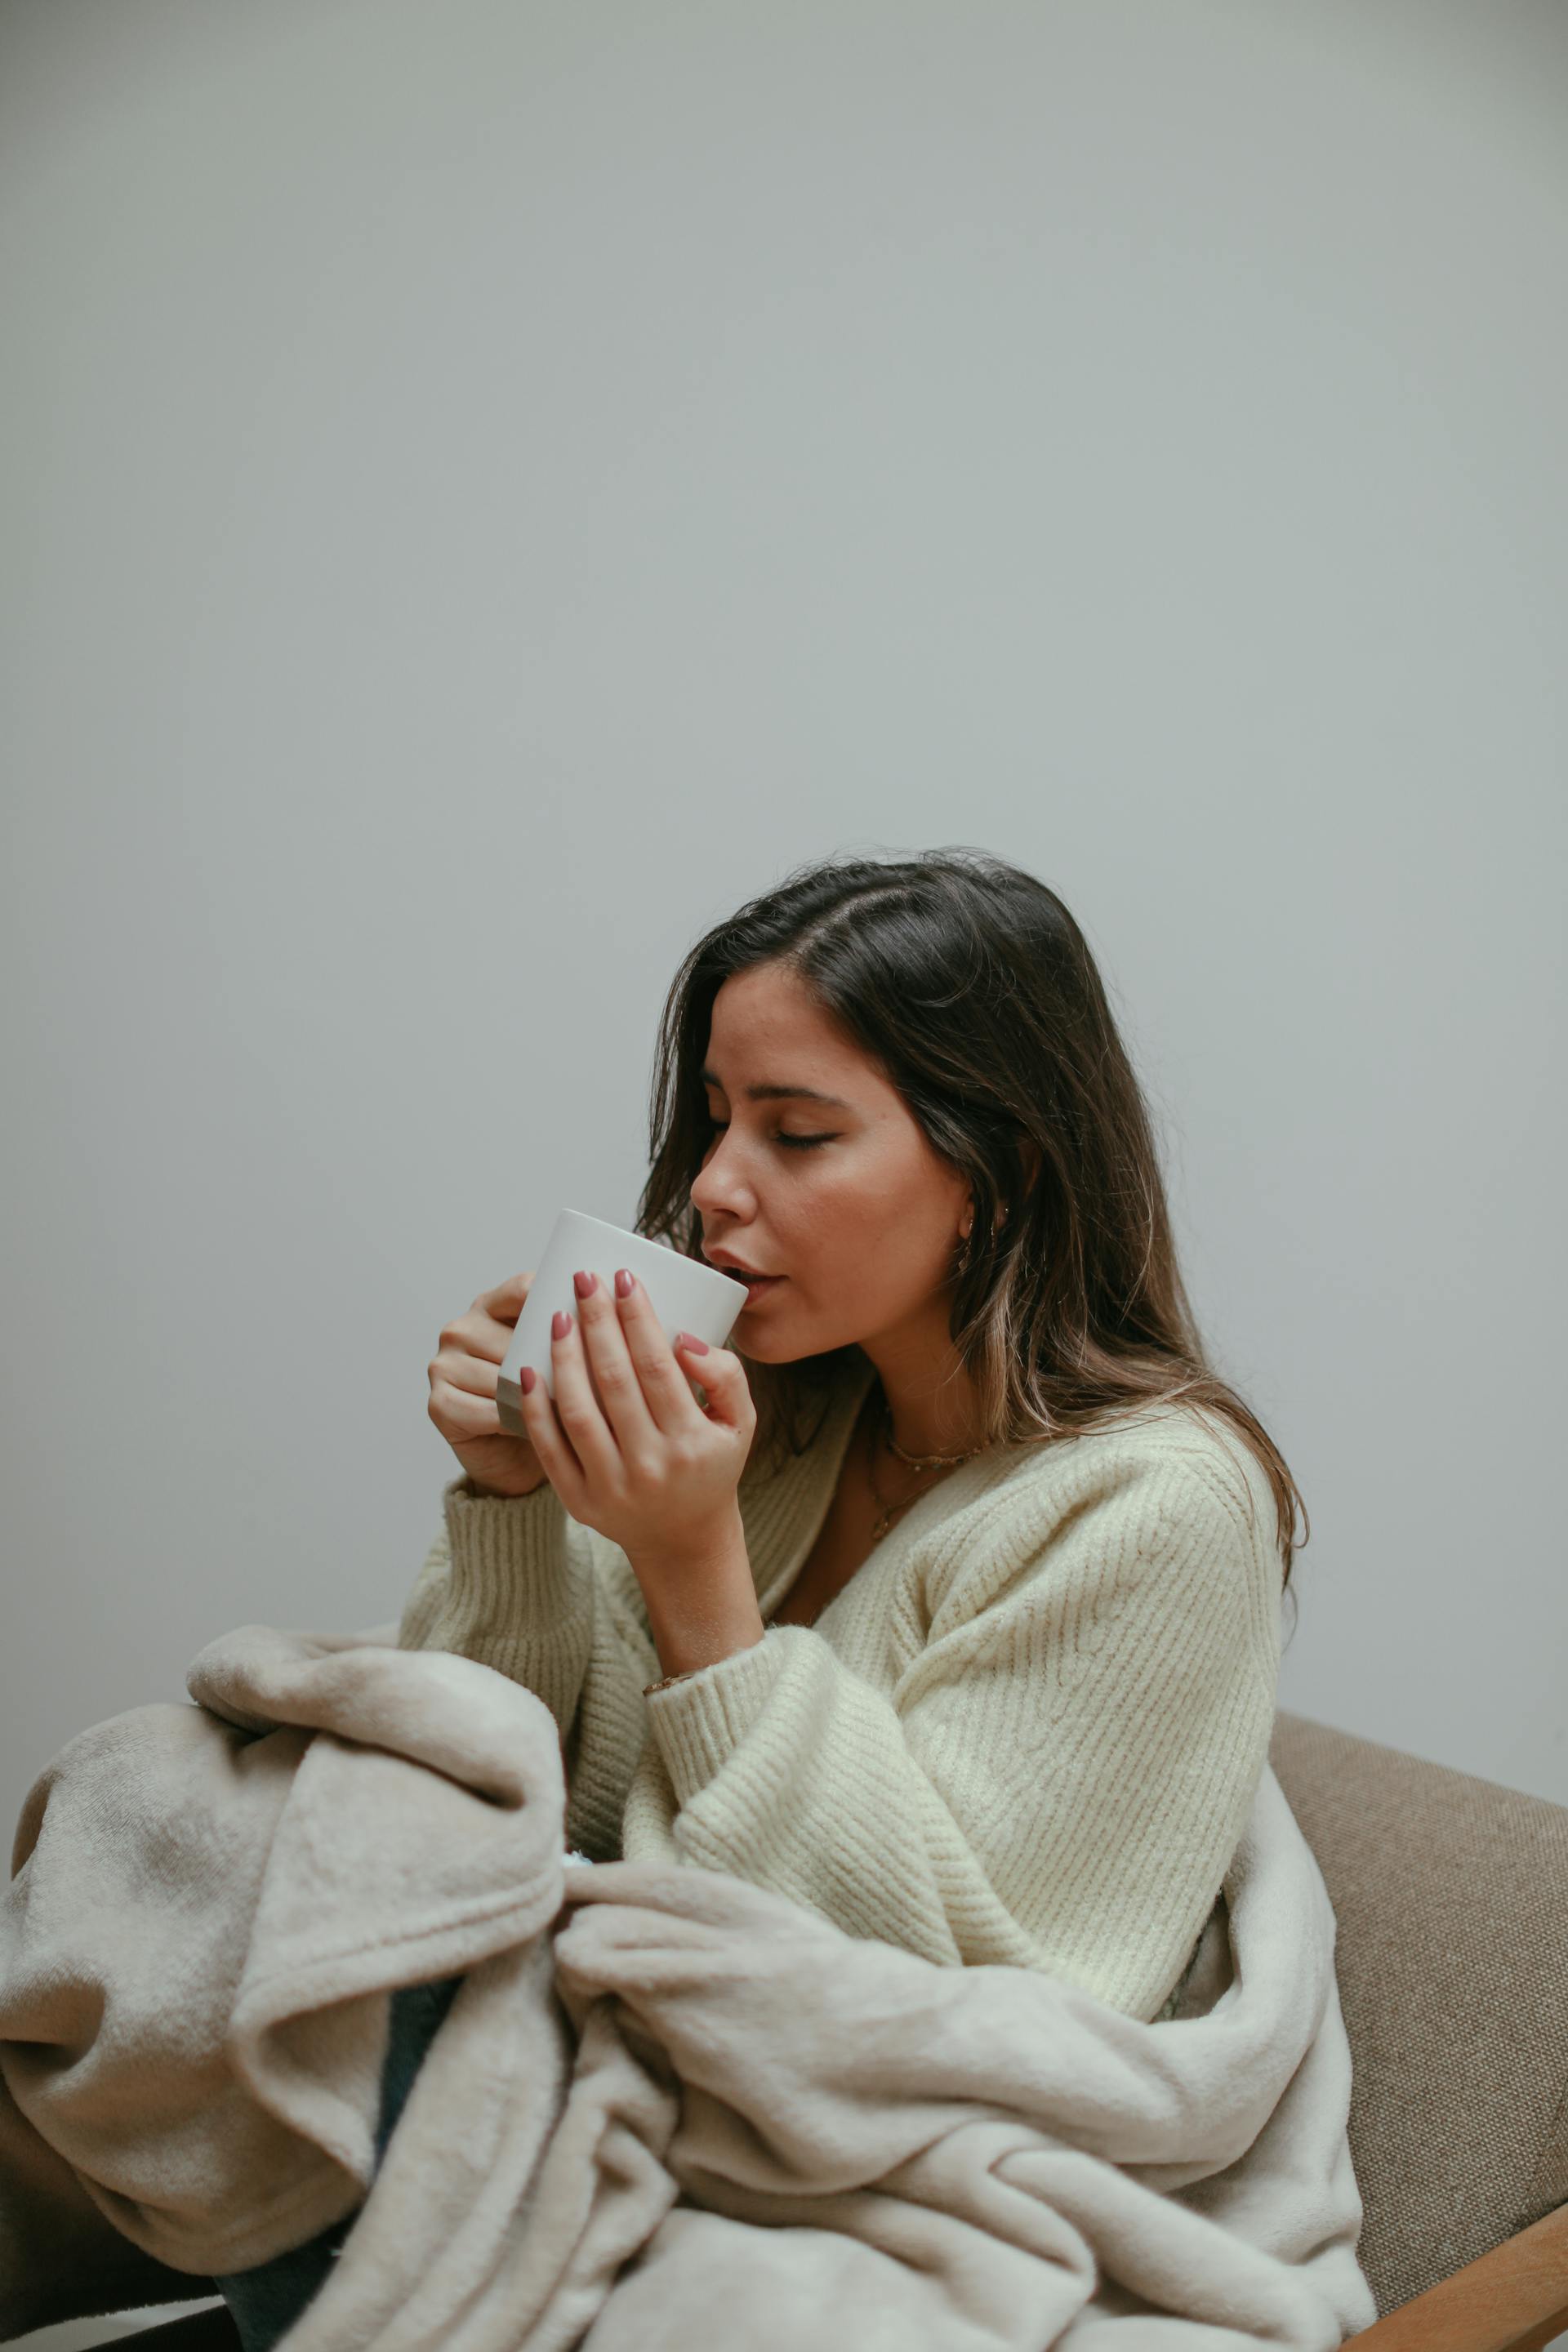 A woman drinking from a mug | Source: Pexels